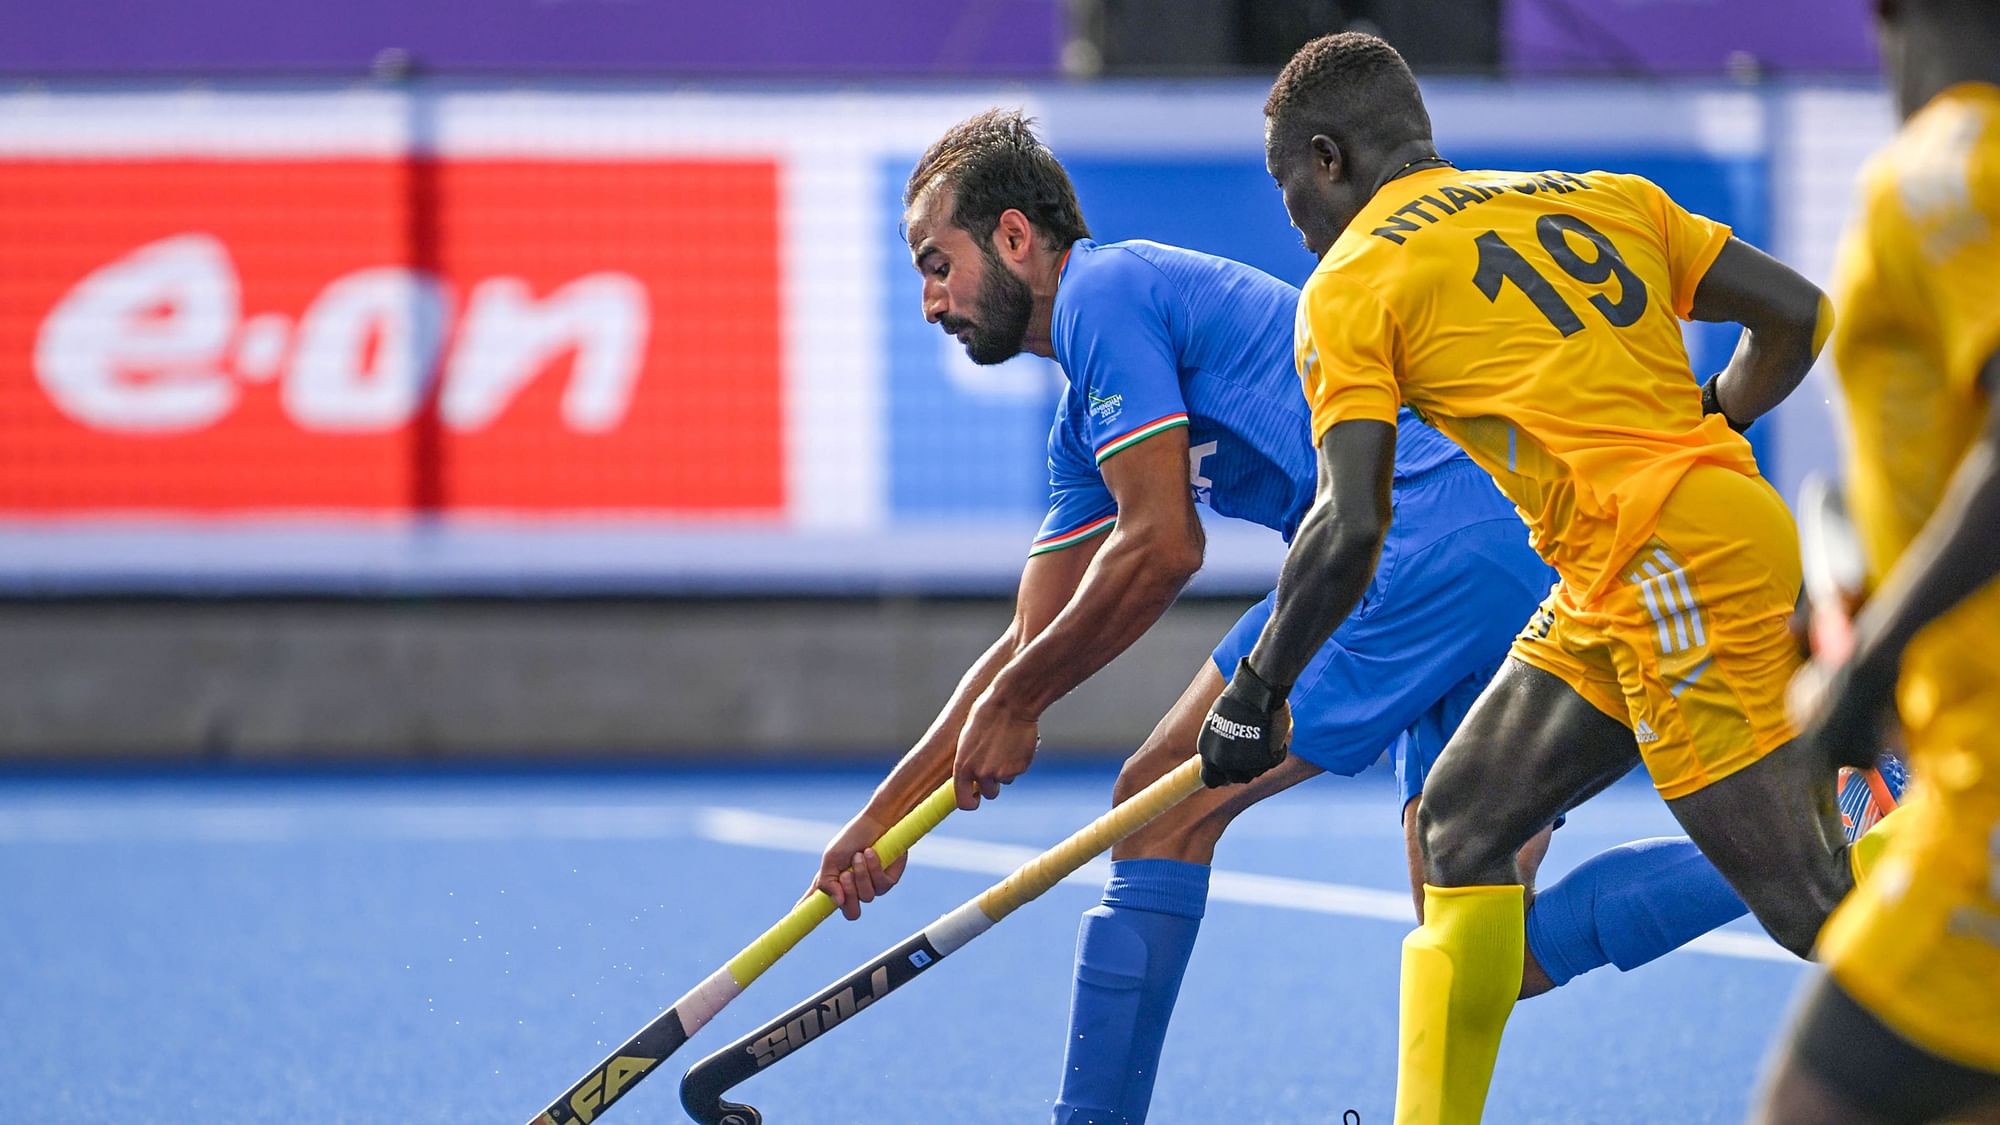 <div class="paragraphs"><p>India's Gurjant Singh in action against Ghana during the Pool B men's field hockey match of the 2022 Commonwealth Games on Sunday.</p></div>